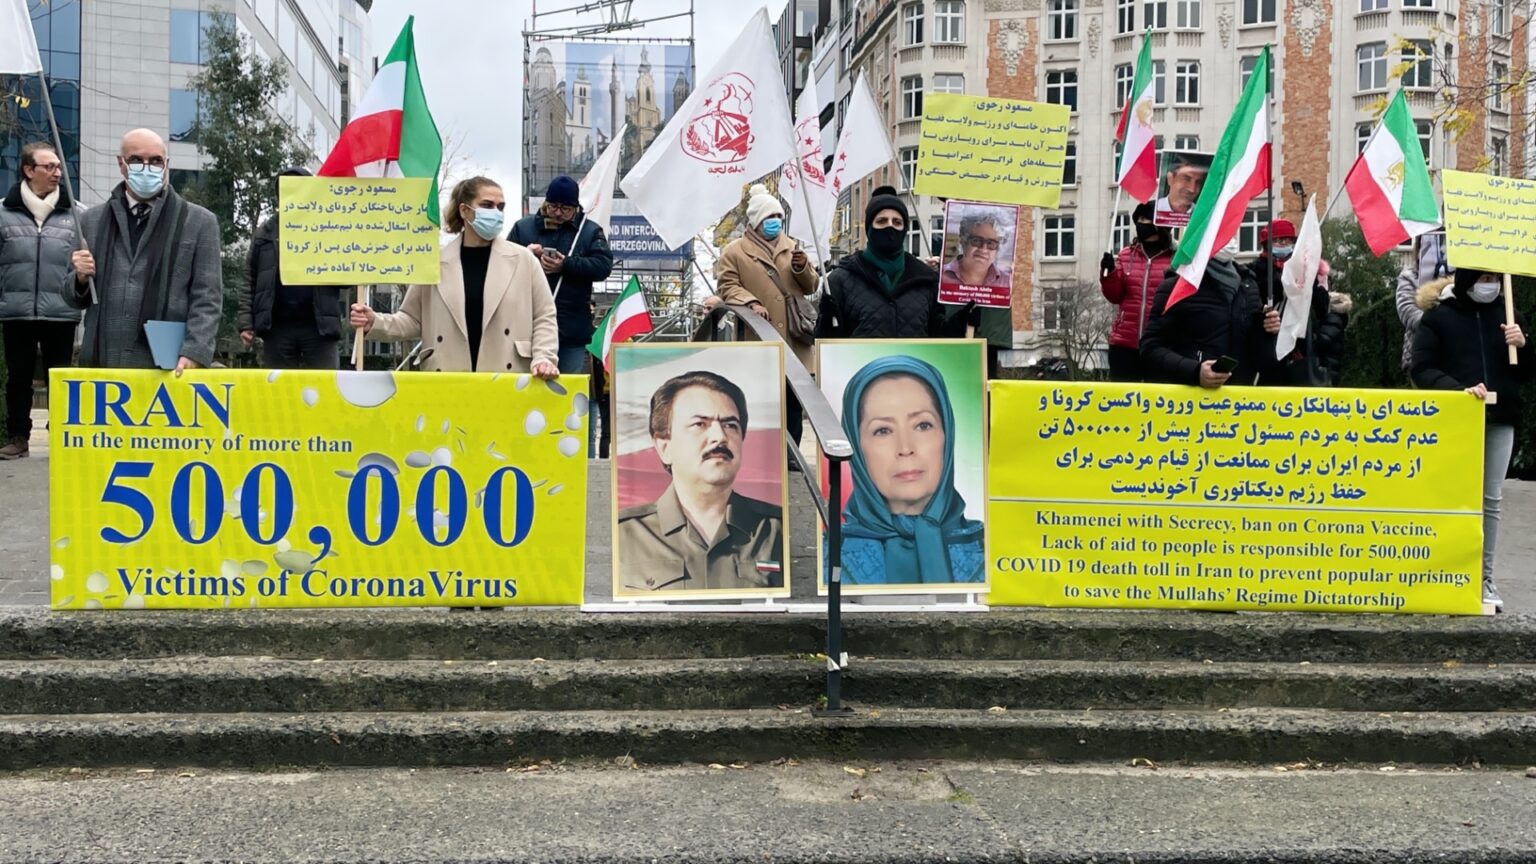 In the Memory of More than 500.000 Deaths of Coronavirus in Iran, NCRI Supporters Rally in Brussels